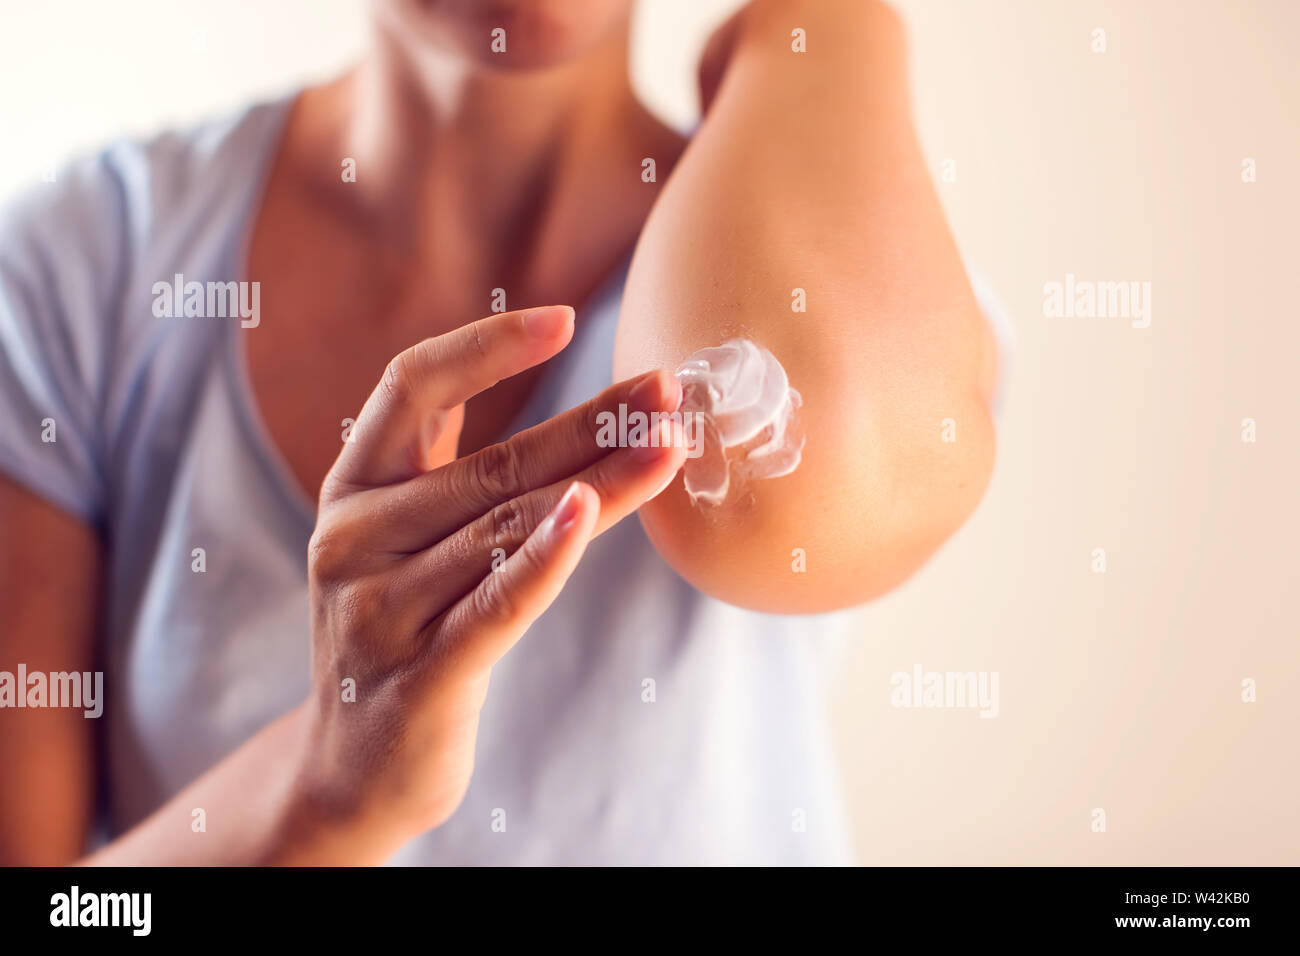 Woman applies cream on her elbow.People, healthcare and medicine concept Stock Photo